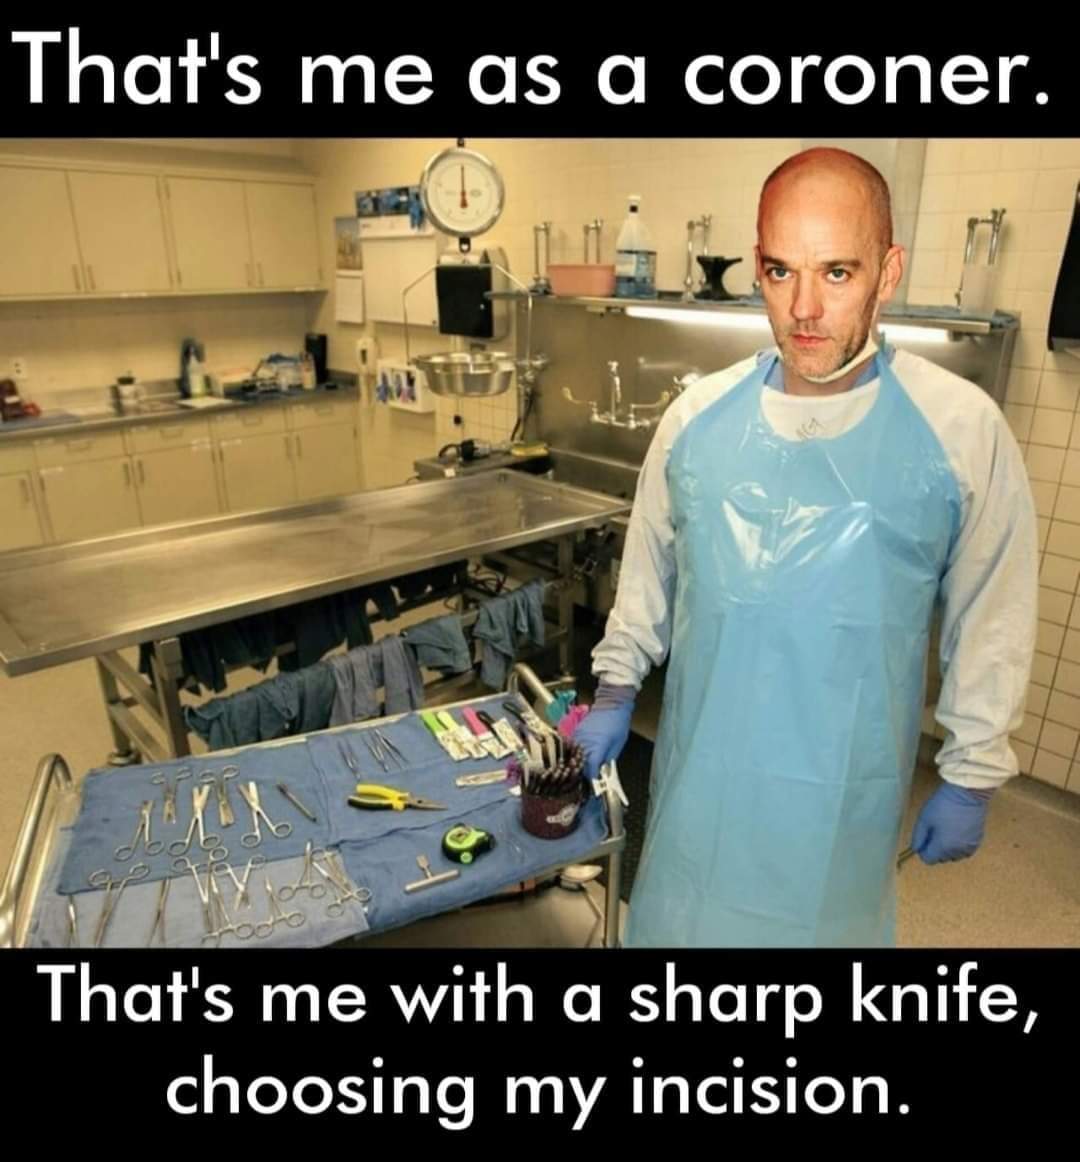 That’s me as a coroner